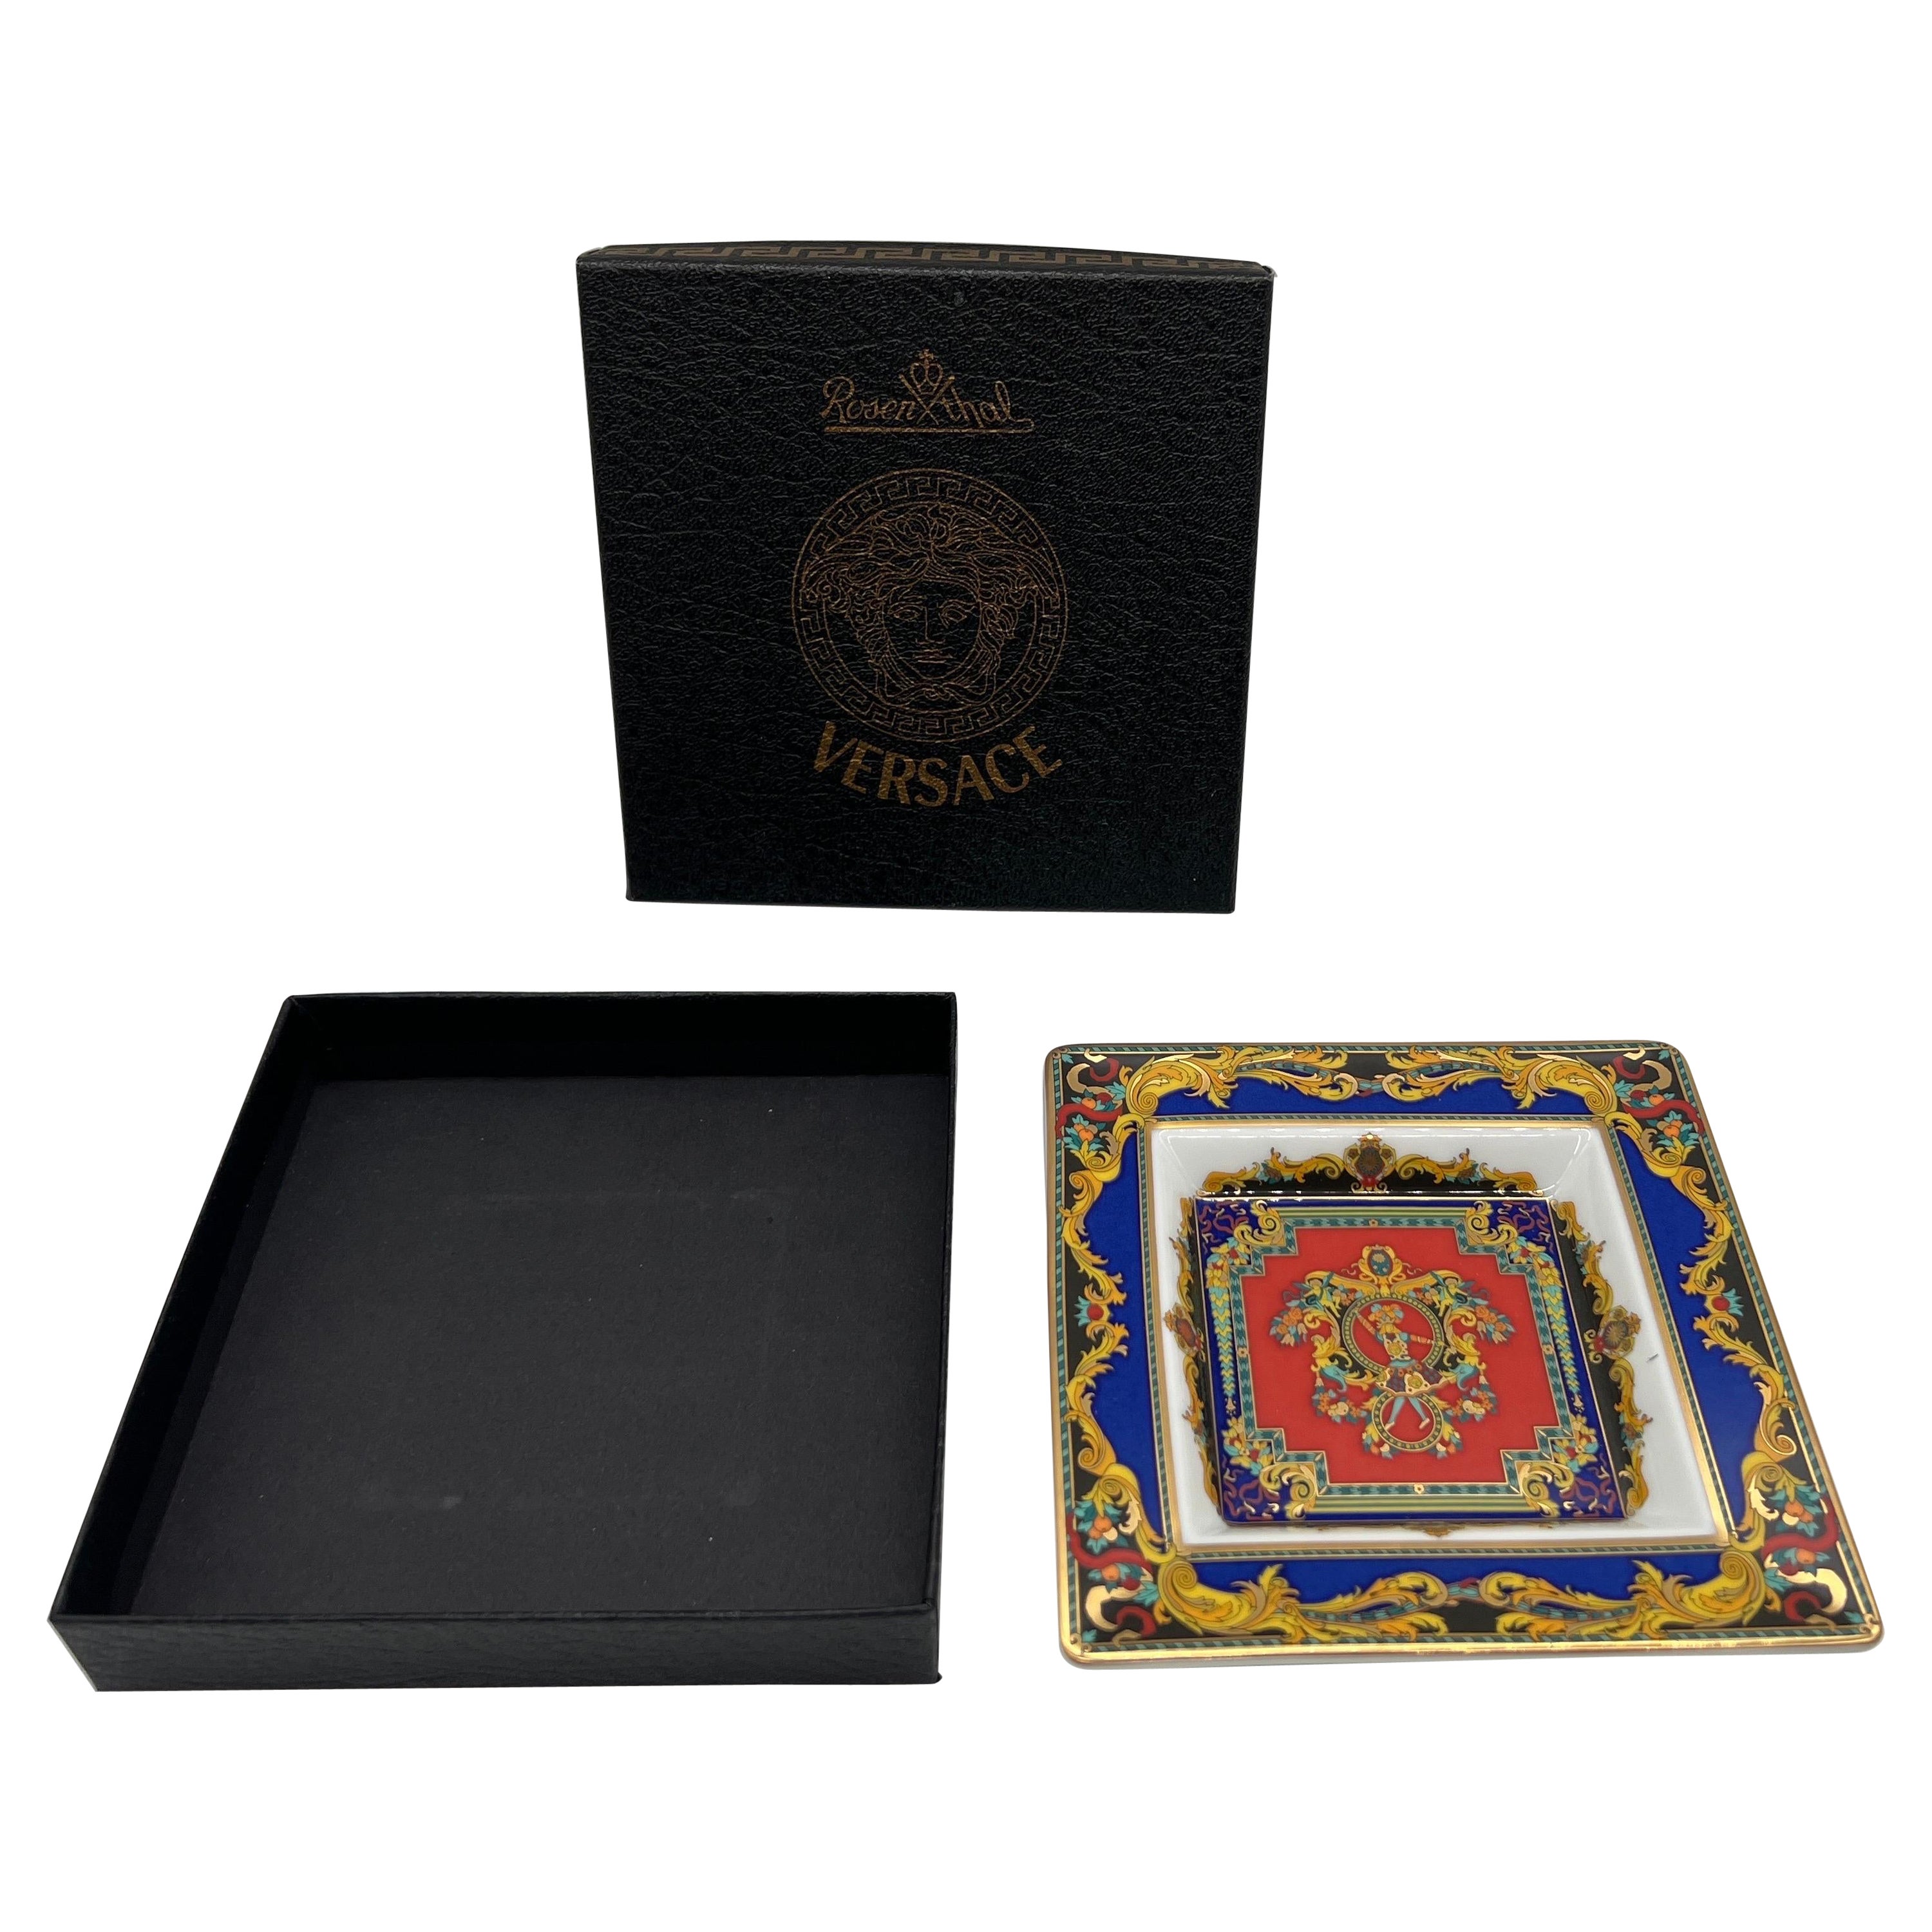 NEW - Rosenthal Versace Porcelain "Le Roi Soleil" Ashtray Plate  For Sale